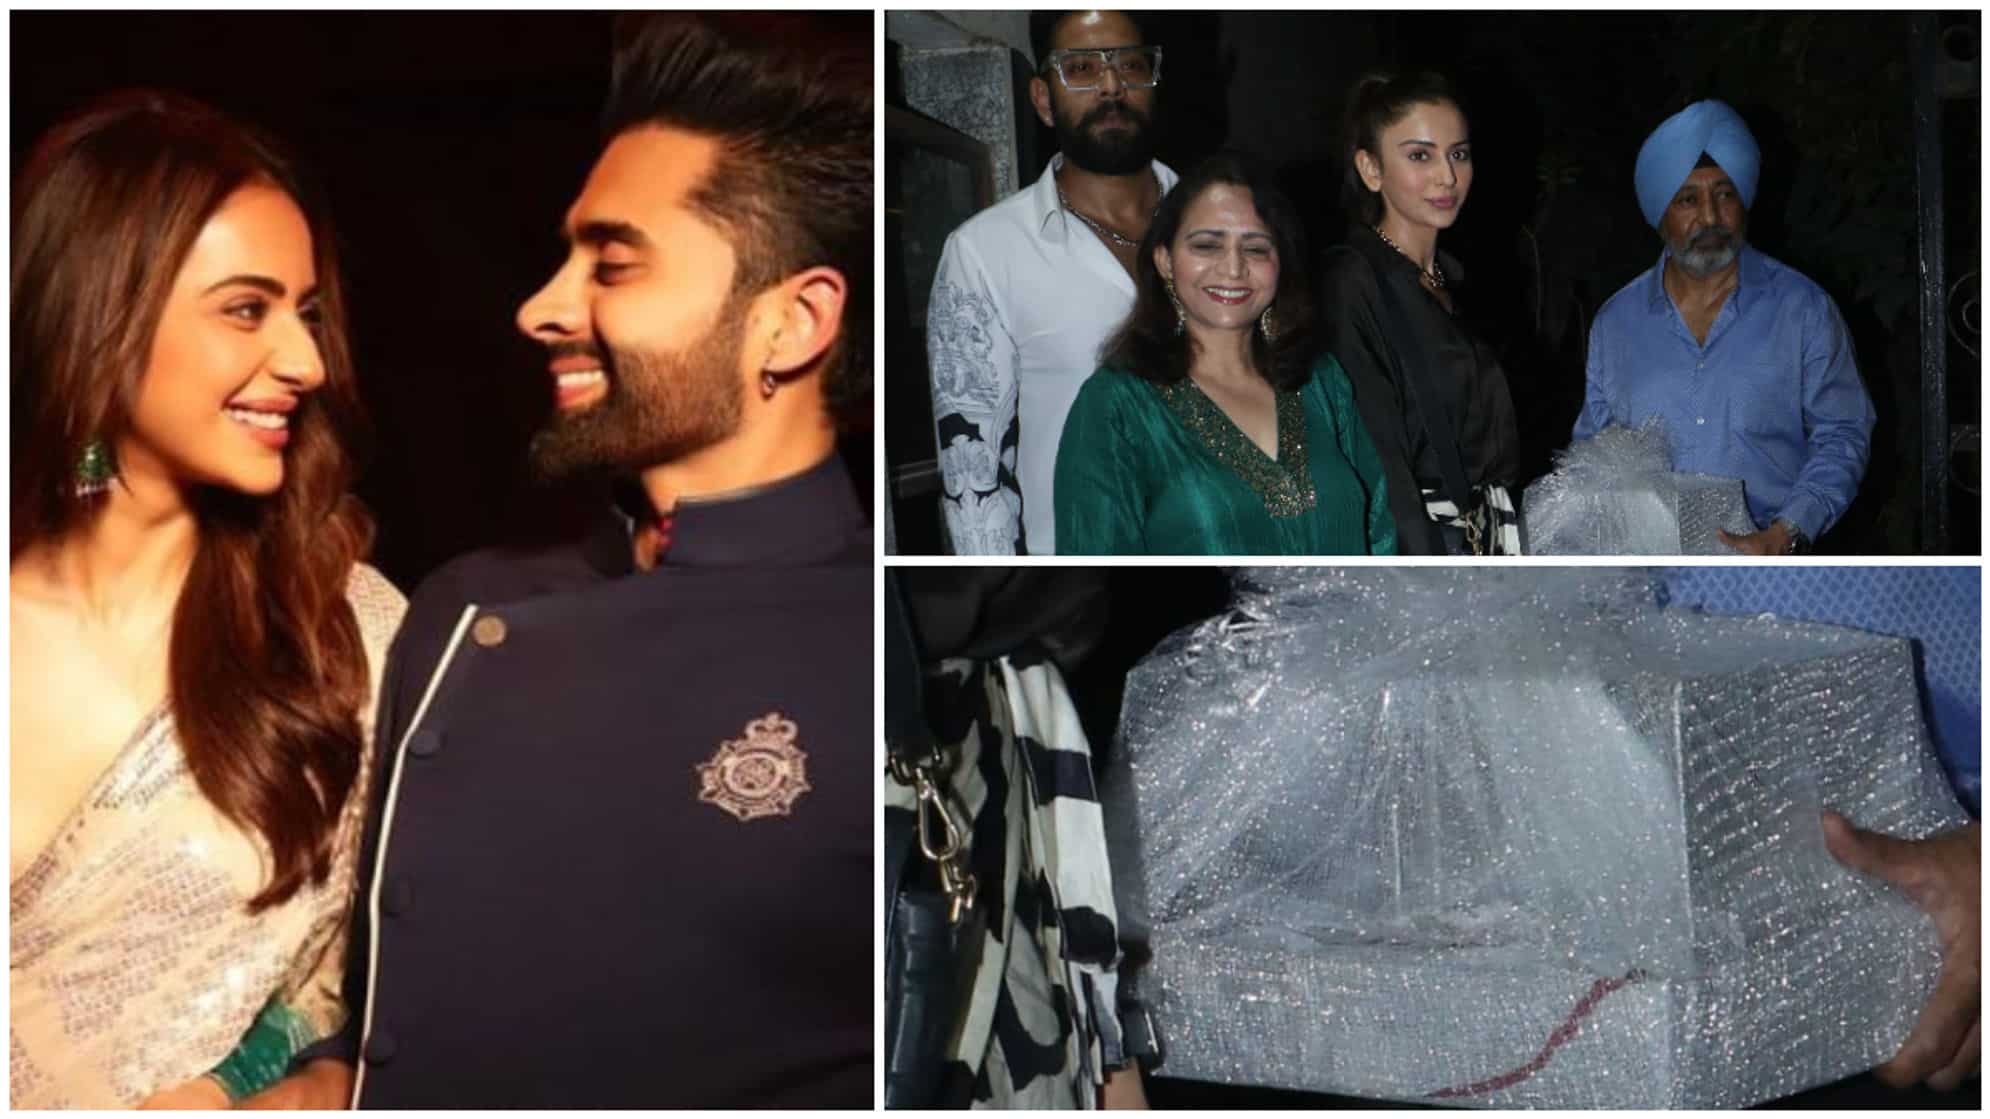 https://www.mobilemasala.com/film-gossip/Rakul-Preet-Singh-Jackky-Bhagnanis-wedding-date-approaches-Watch-how-their-parents-carried-gifts-for-them-i213966